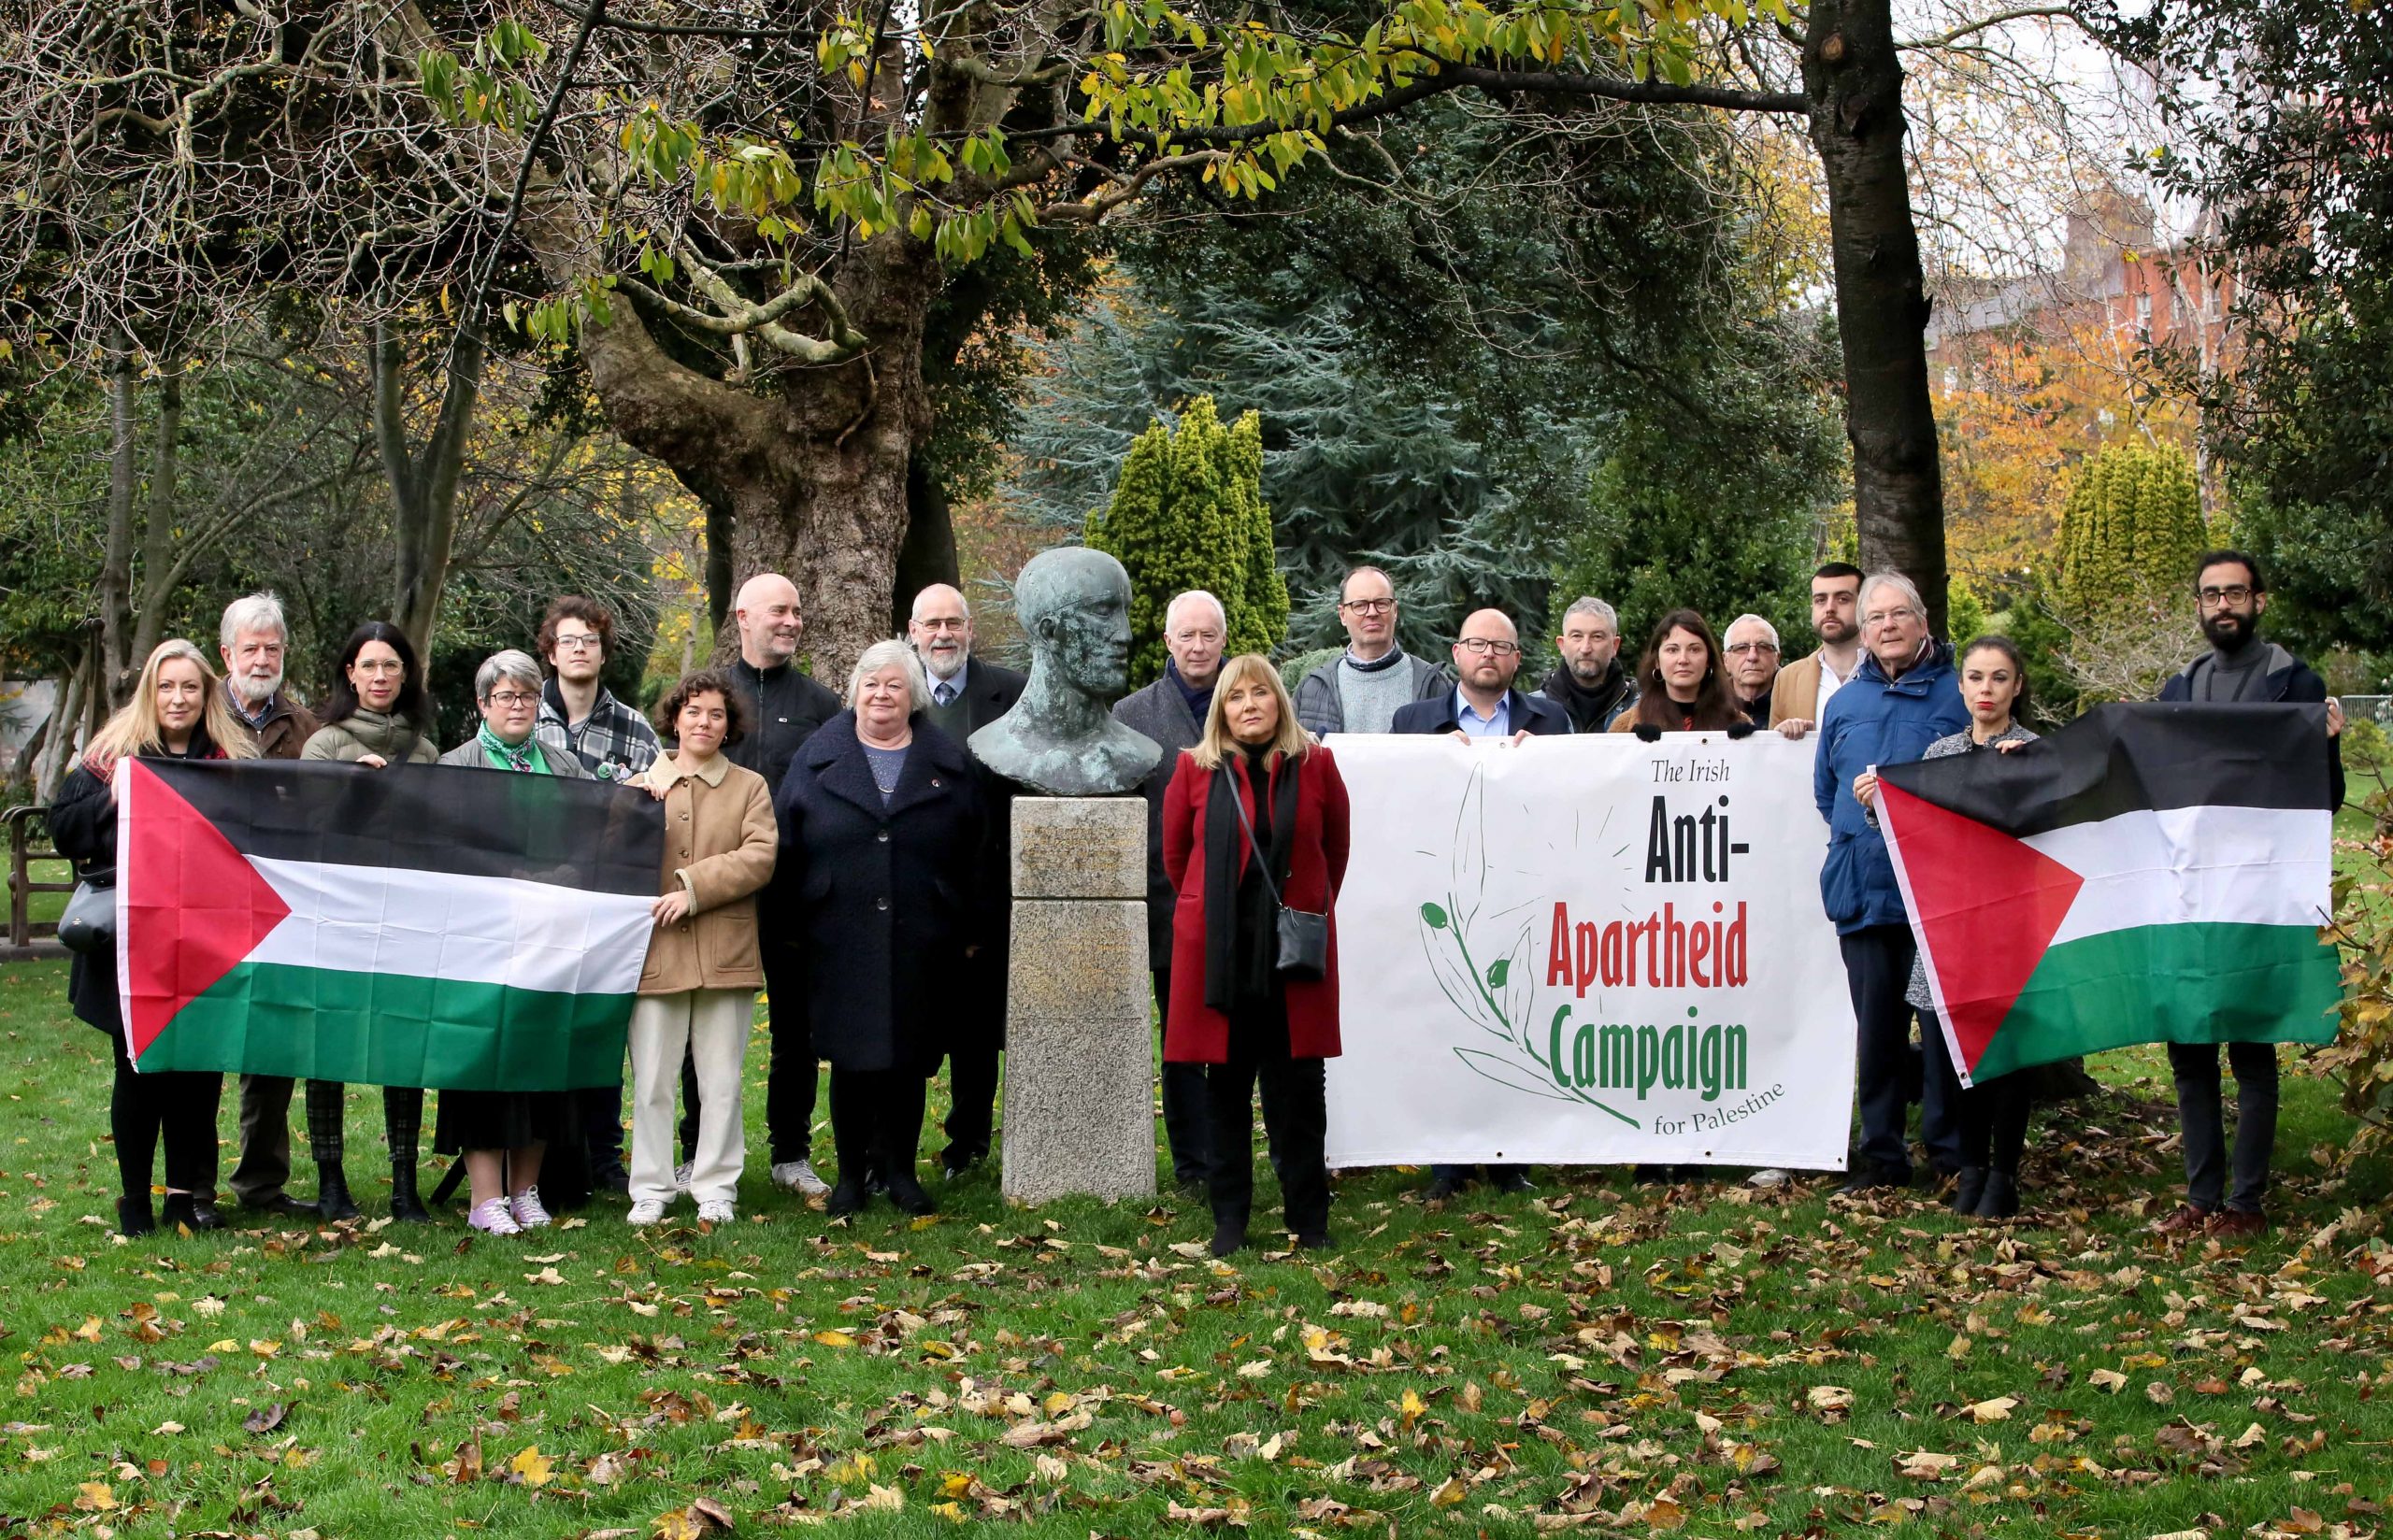 The newly formed Irish Anti-Apartheid Campaign calls on Ireland to take action on Israeli apartheid against Palestinians. The coalition, made up of 18 civil society organisations, trade unions and academic experts committed to working collaboratively to end Israeli apartheid against Palestinians, was launched today in Merrion Square, Dublin by Independent Senator Frances Black (centre) at the ‘Tribute Head’ in honour of Nelson Mandela. Photo: Mark Stedman